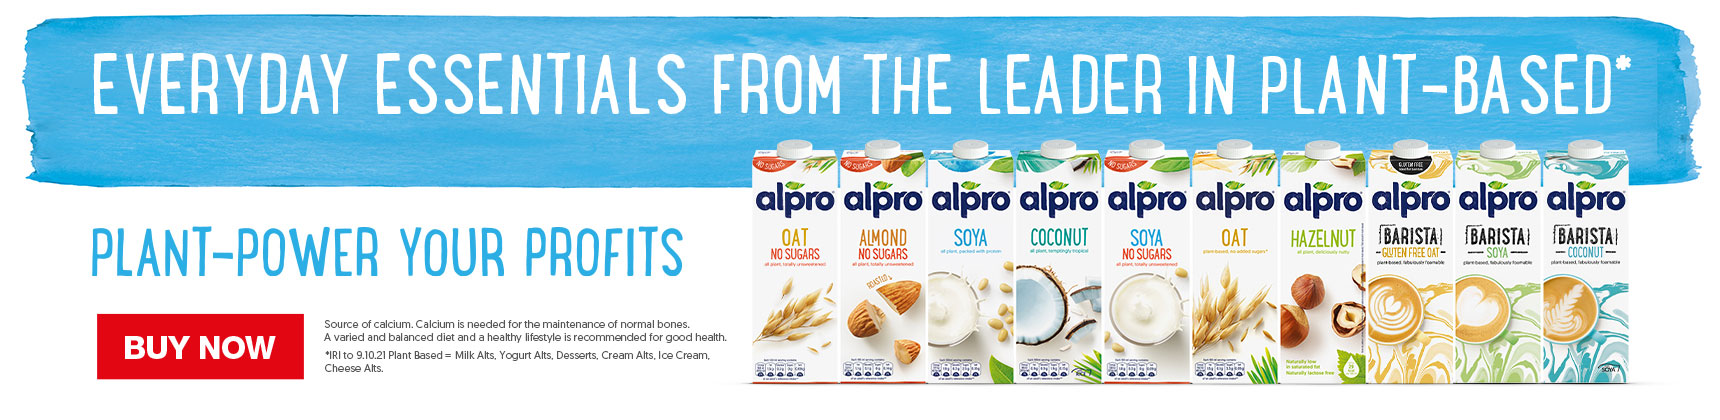 Alpro – Everyday essentials from the leader in plant-based